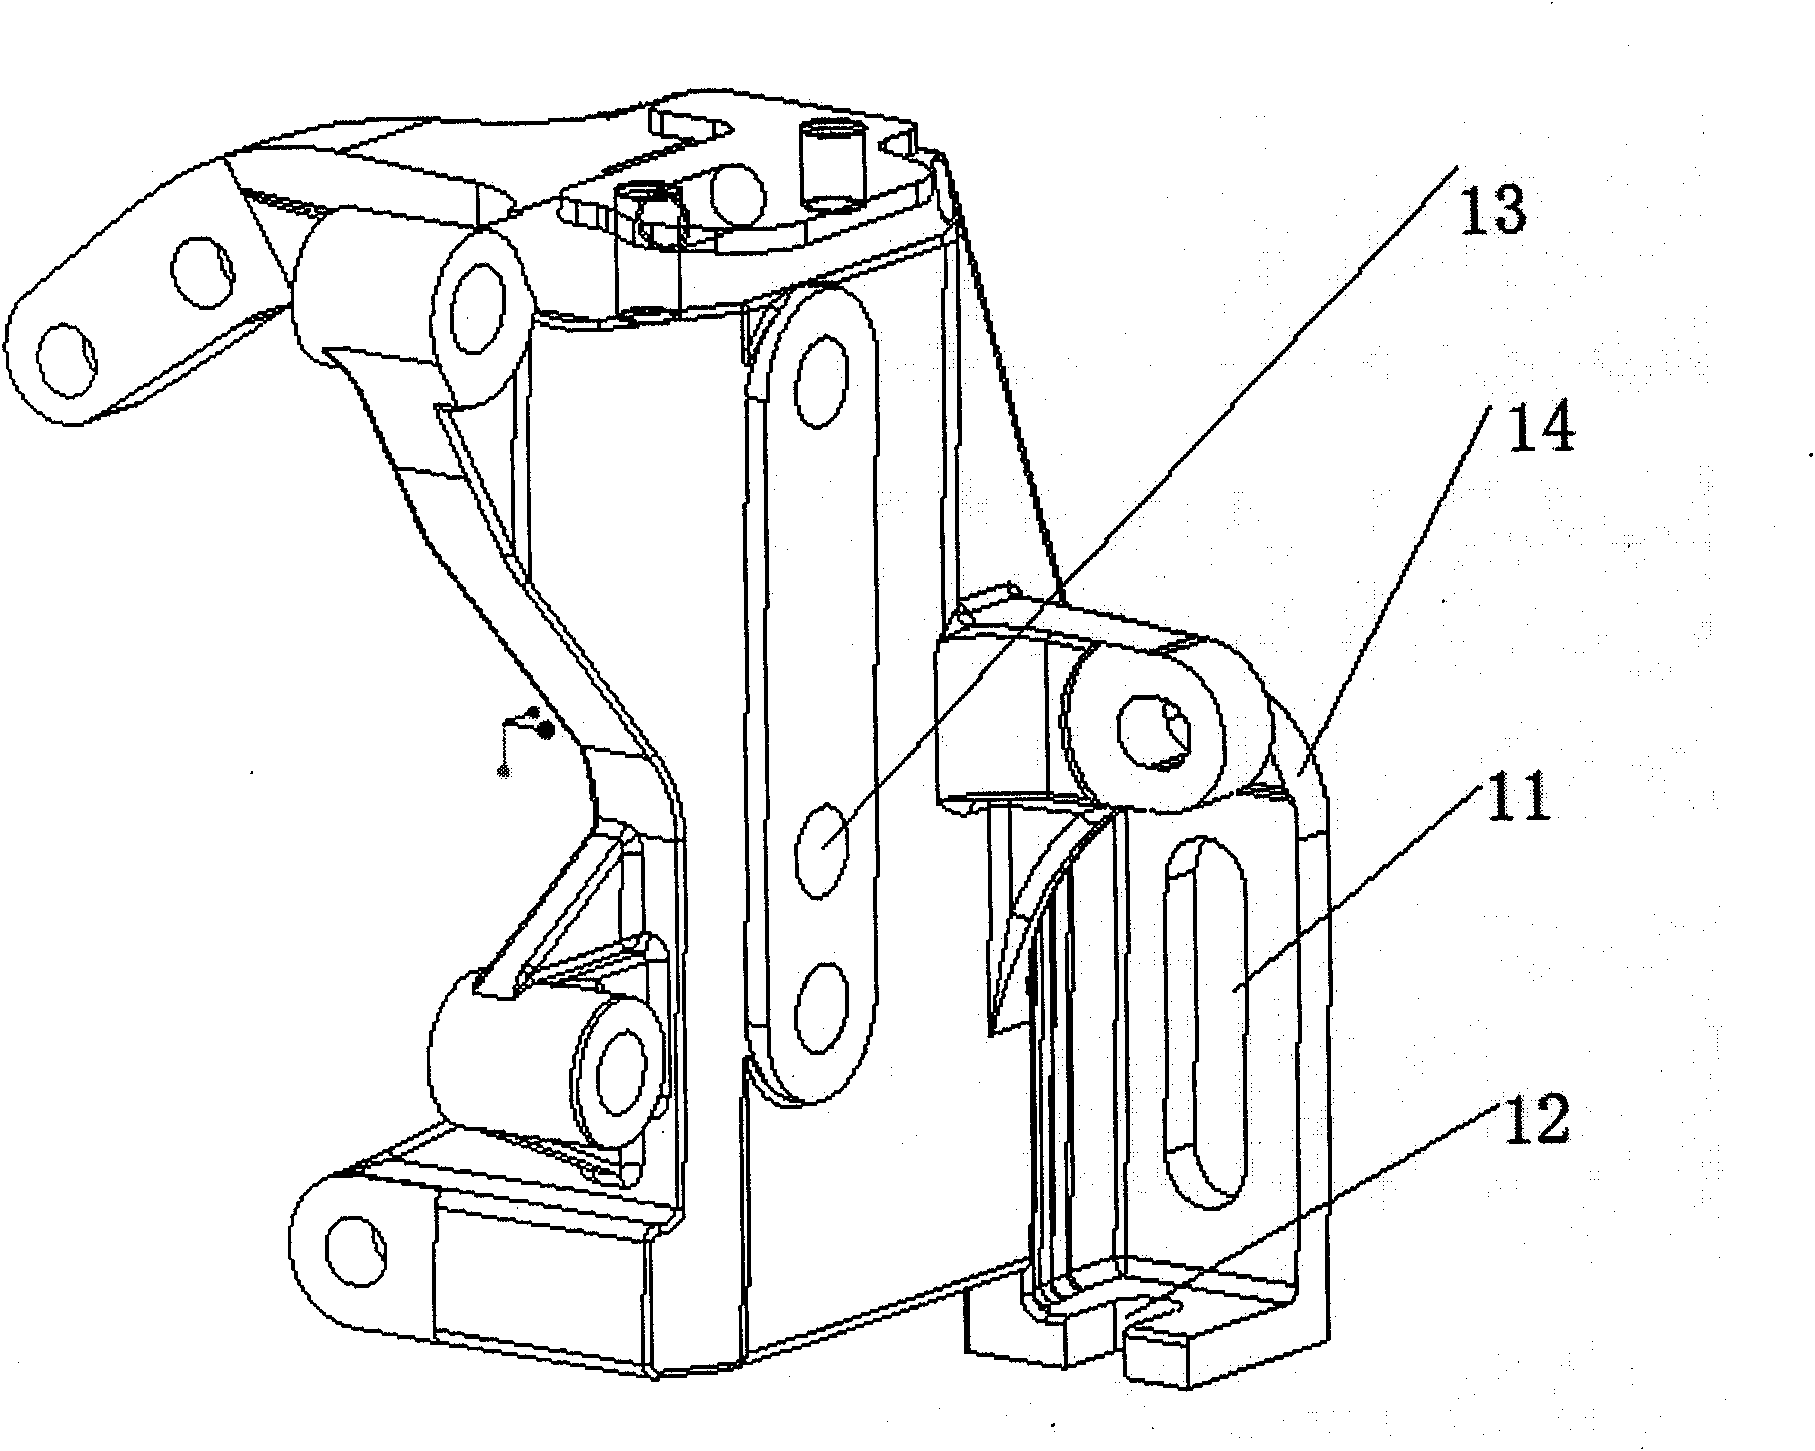 Accessory belt tensioning device of engine accessory wheel system